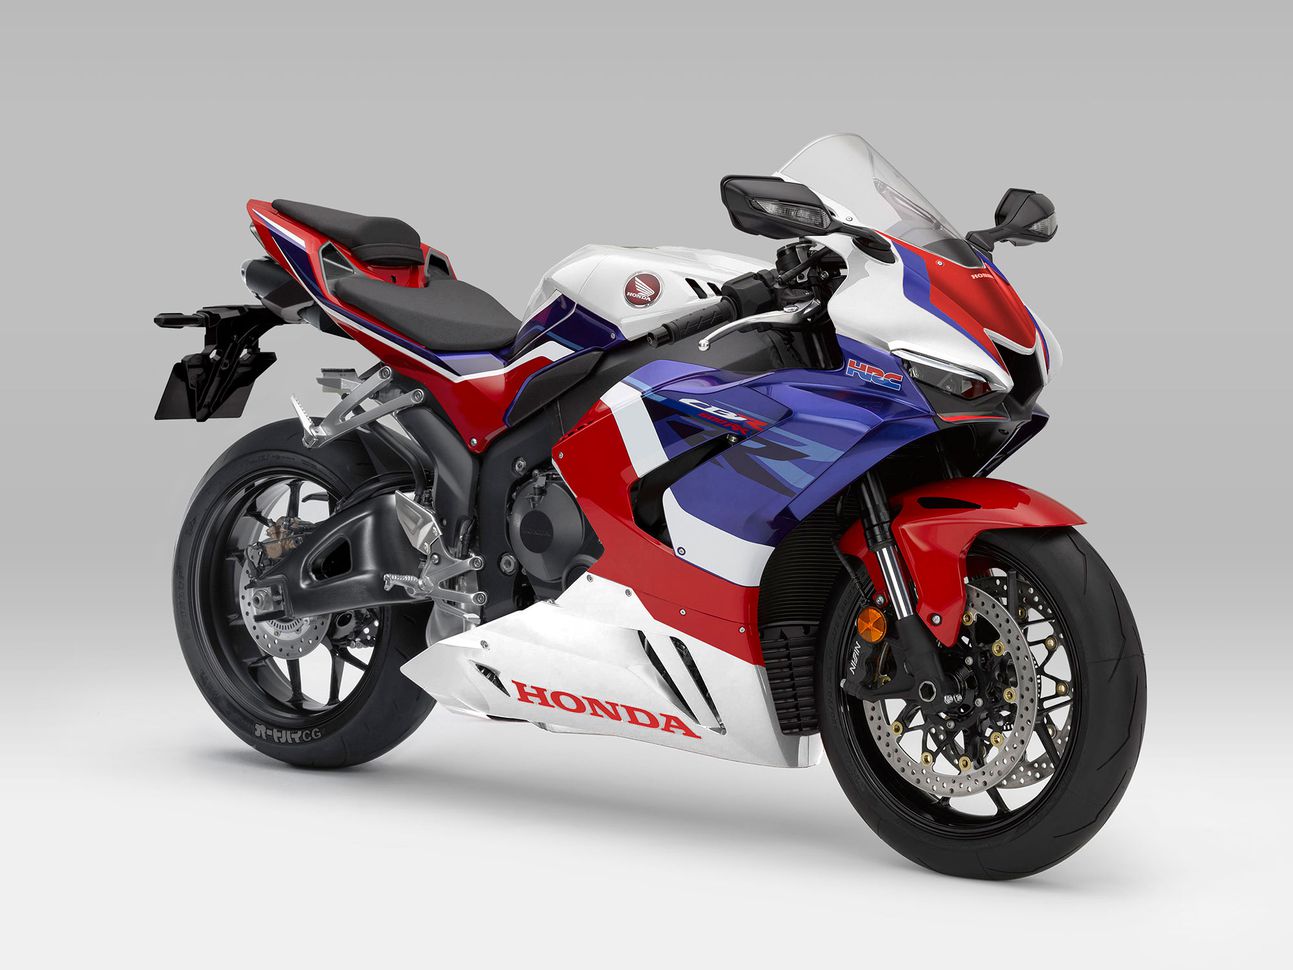 Could This Be How the New Honda CBR600RR Looks Like? DriveMag Riders